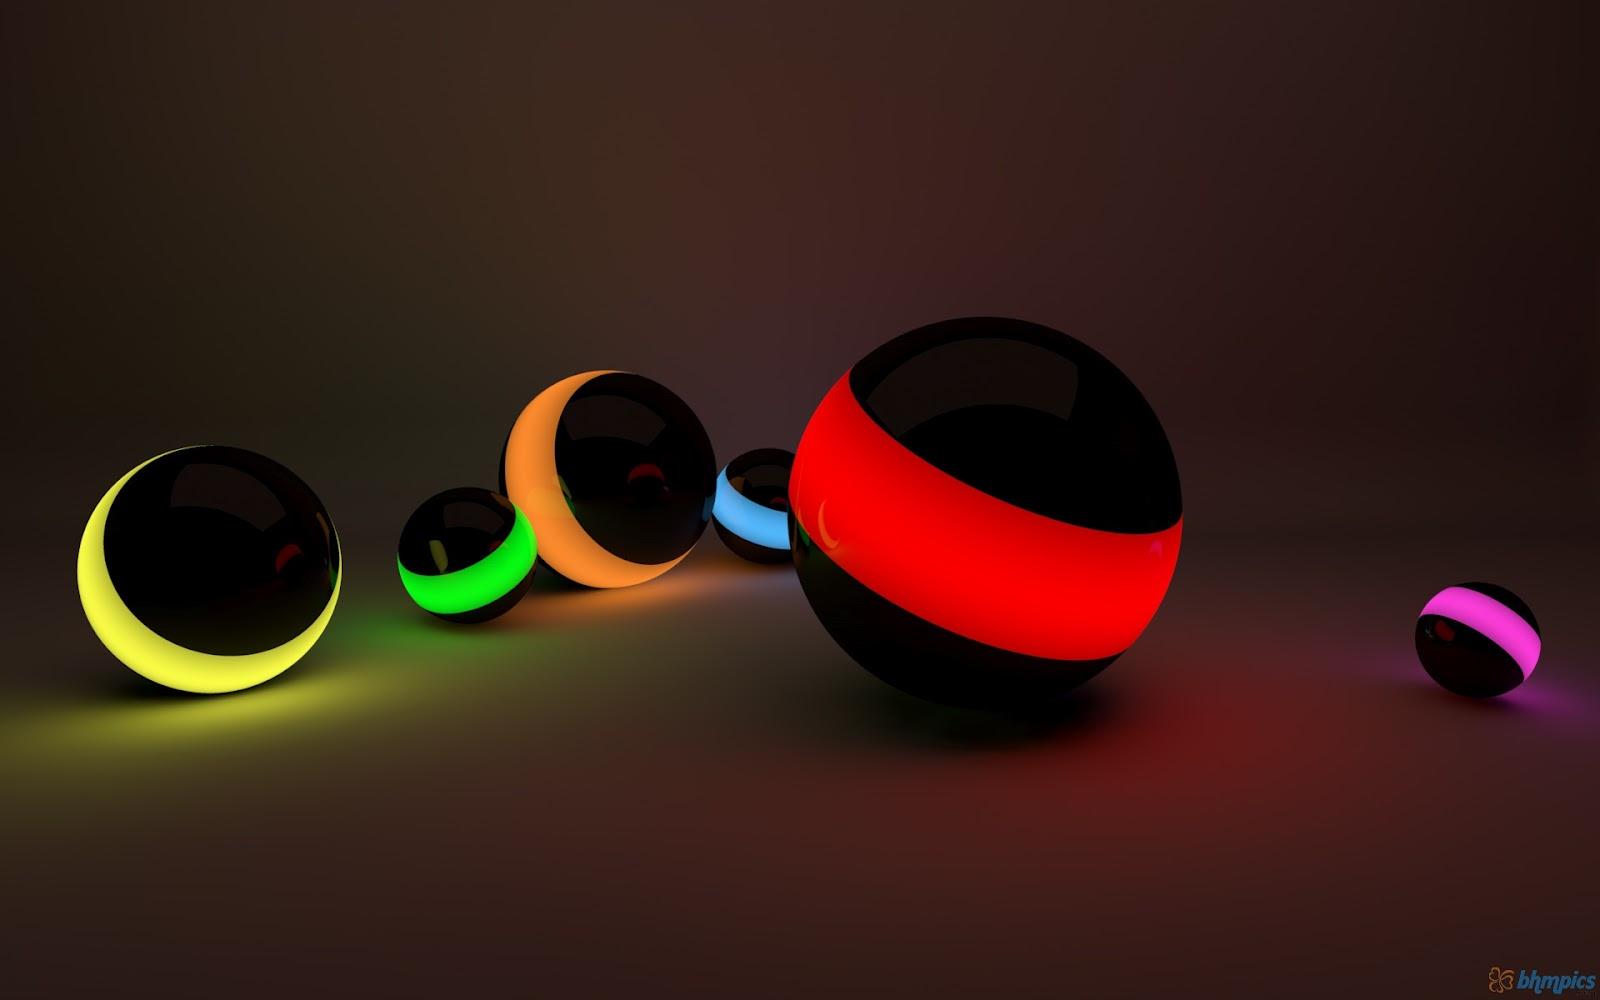 Free Best Picture: 3D Colored Balls Wallpaper & 3D Colored